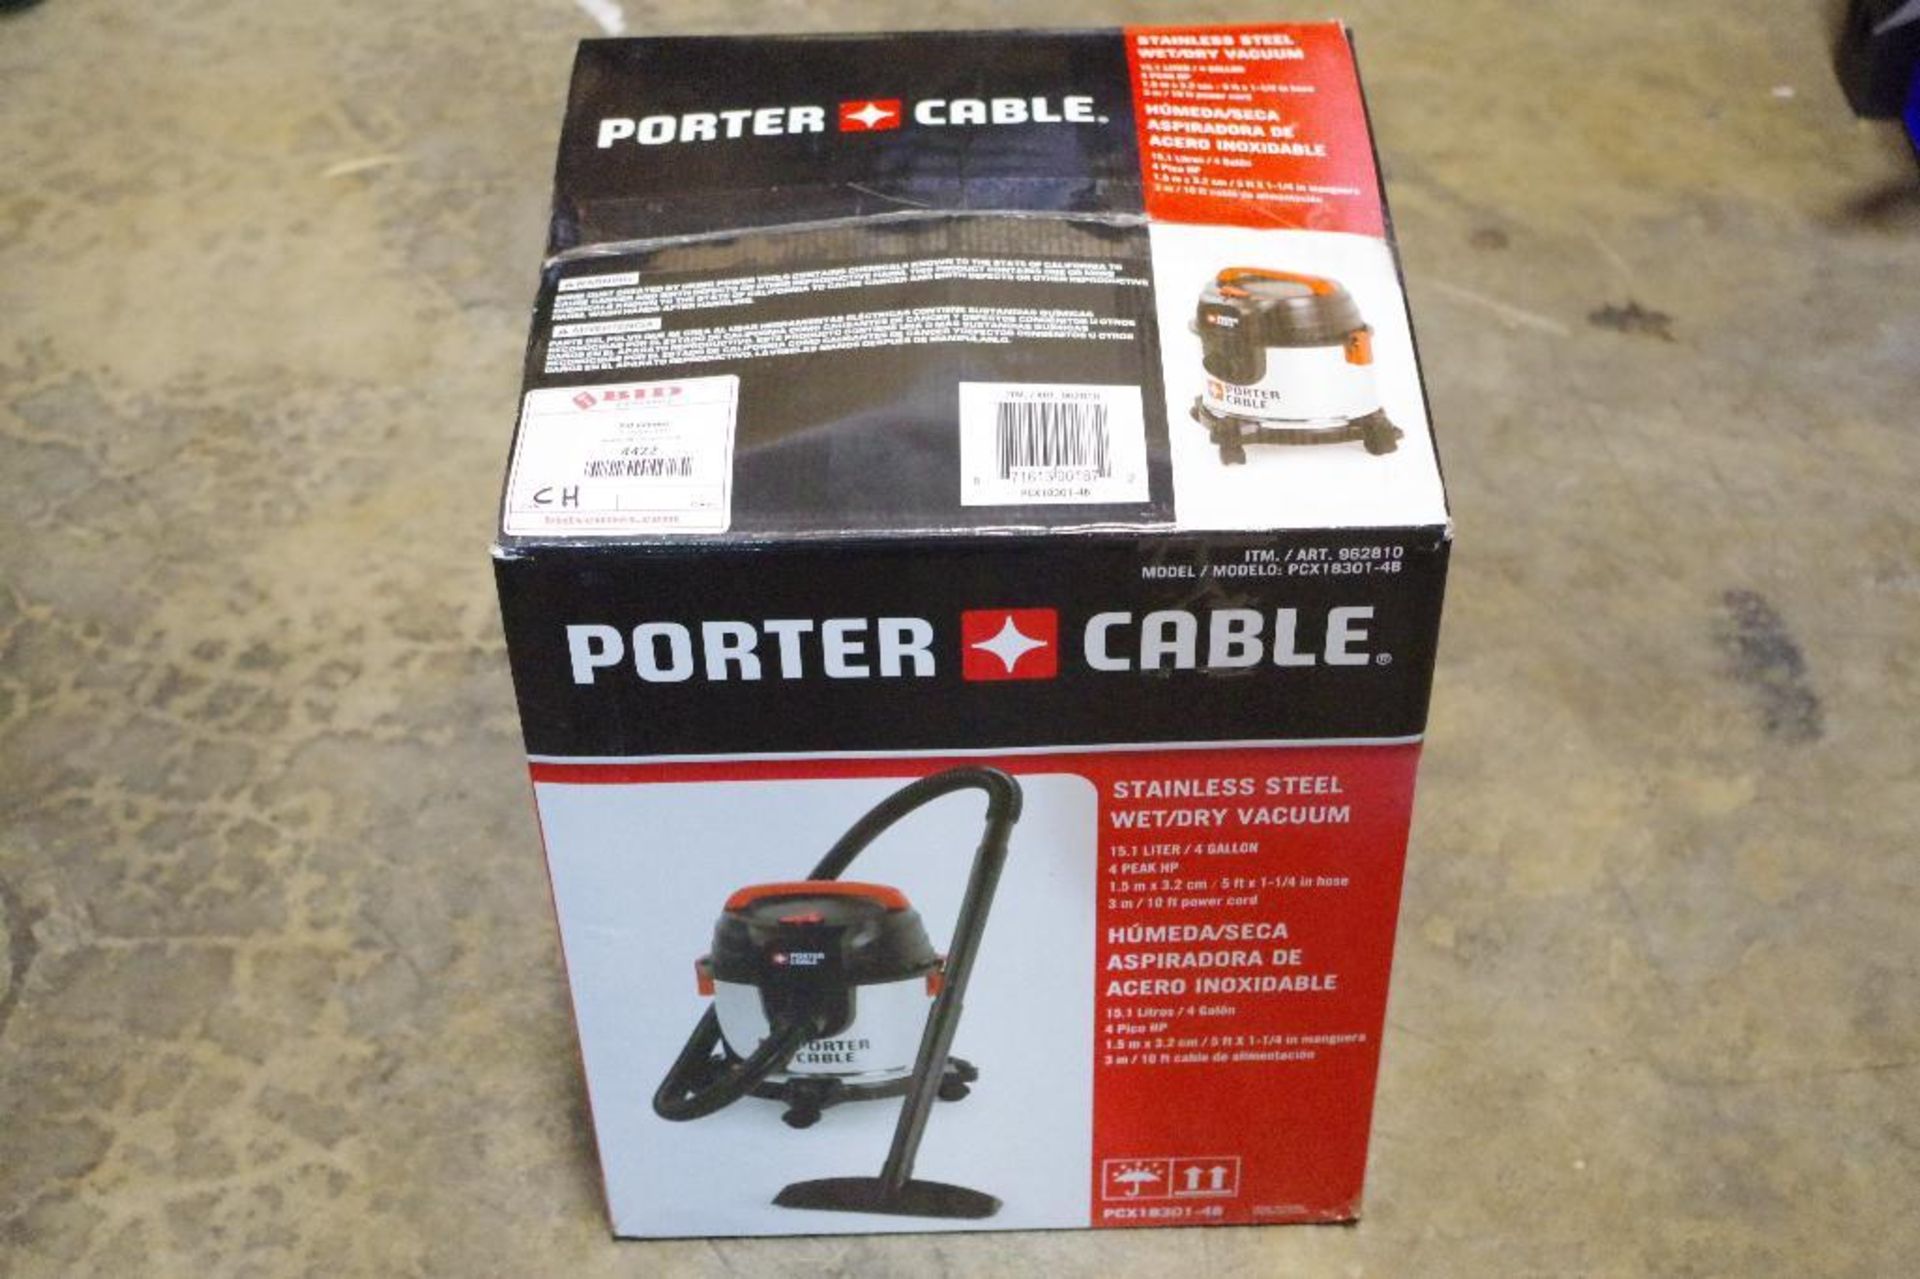 PORTER CABLE 4 Gal. Wet/Dry Vacuum M/N PCX18301-48 - Image 2 of 2